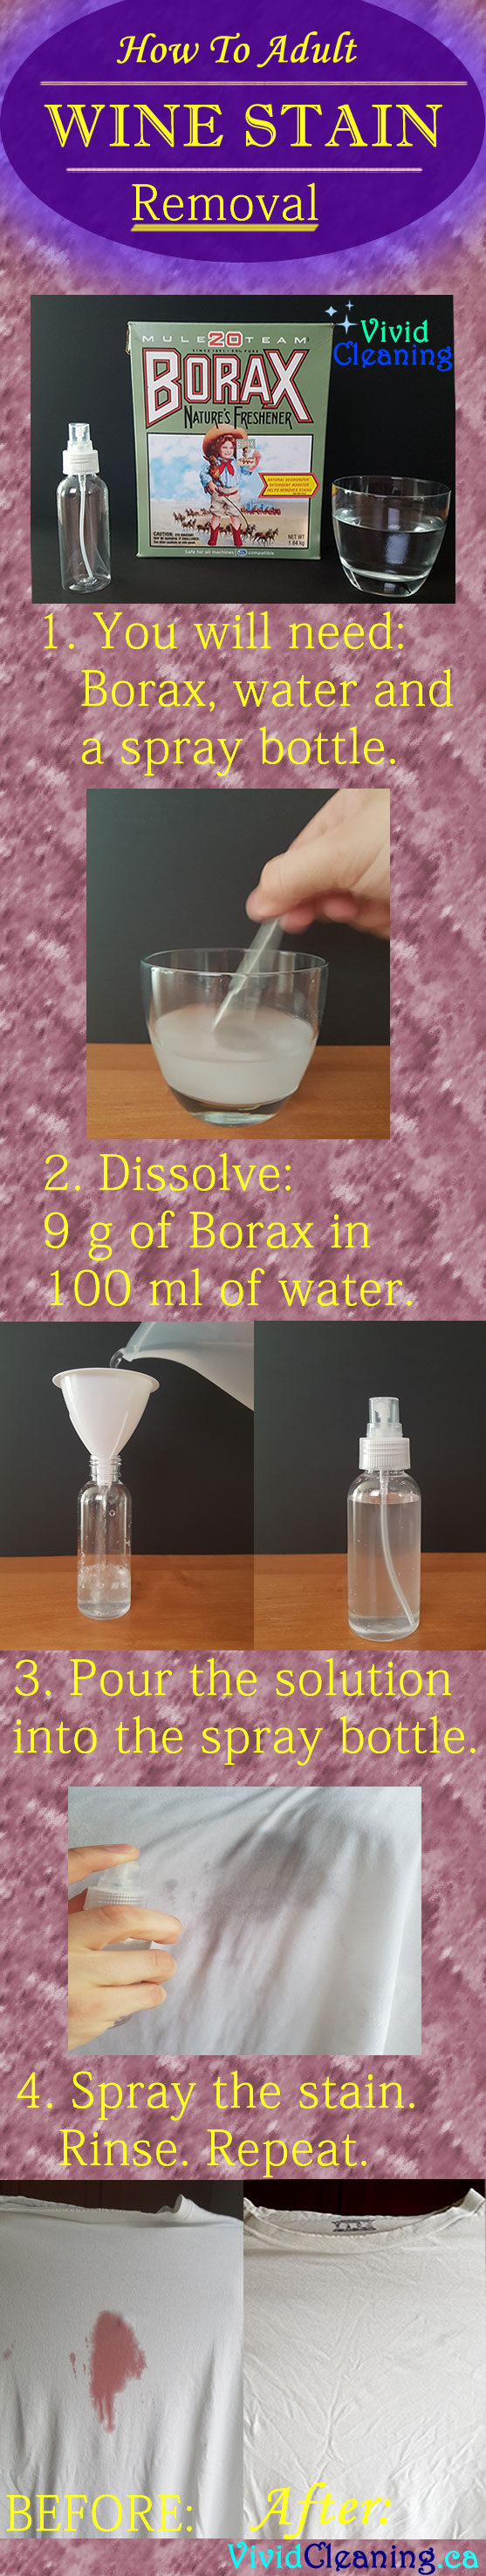 You will need: Borax, water, and a spray bottle. Dissolve 9 g of Borax in 100 ml of water. Pour the solution into the spray bottle. Spray the stain. Rinse. Repeat.